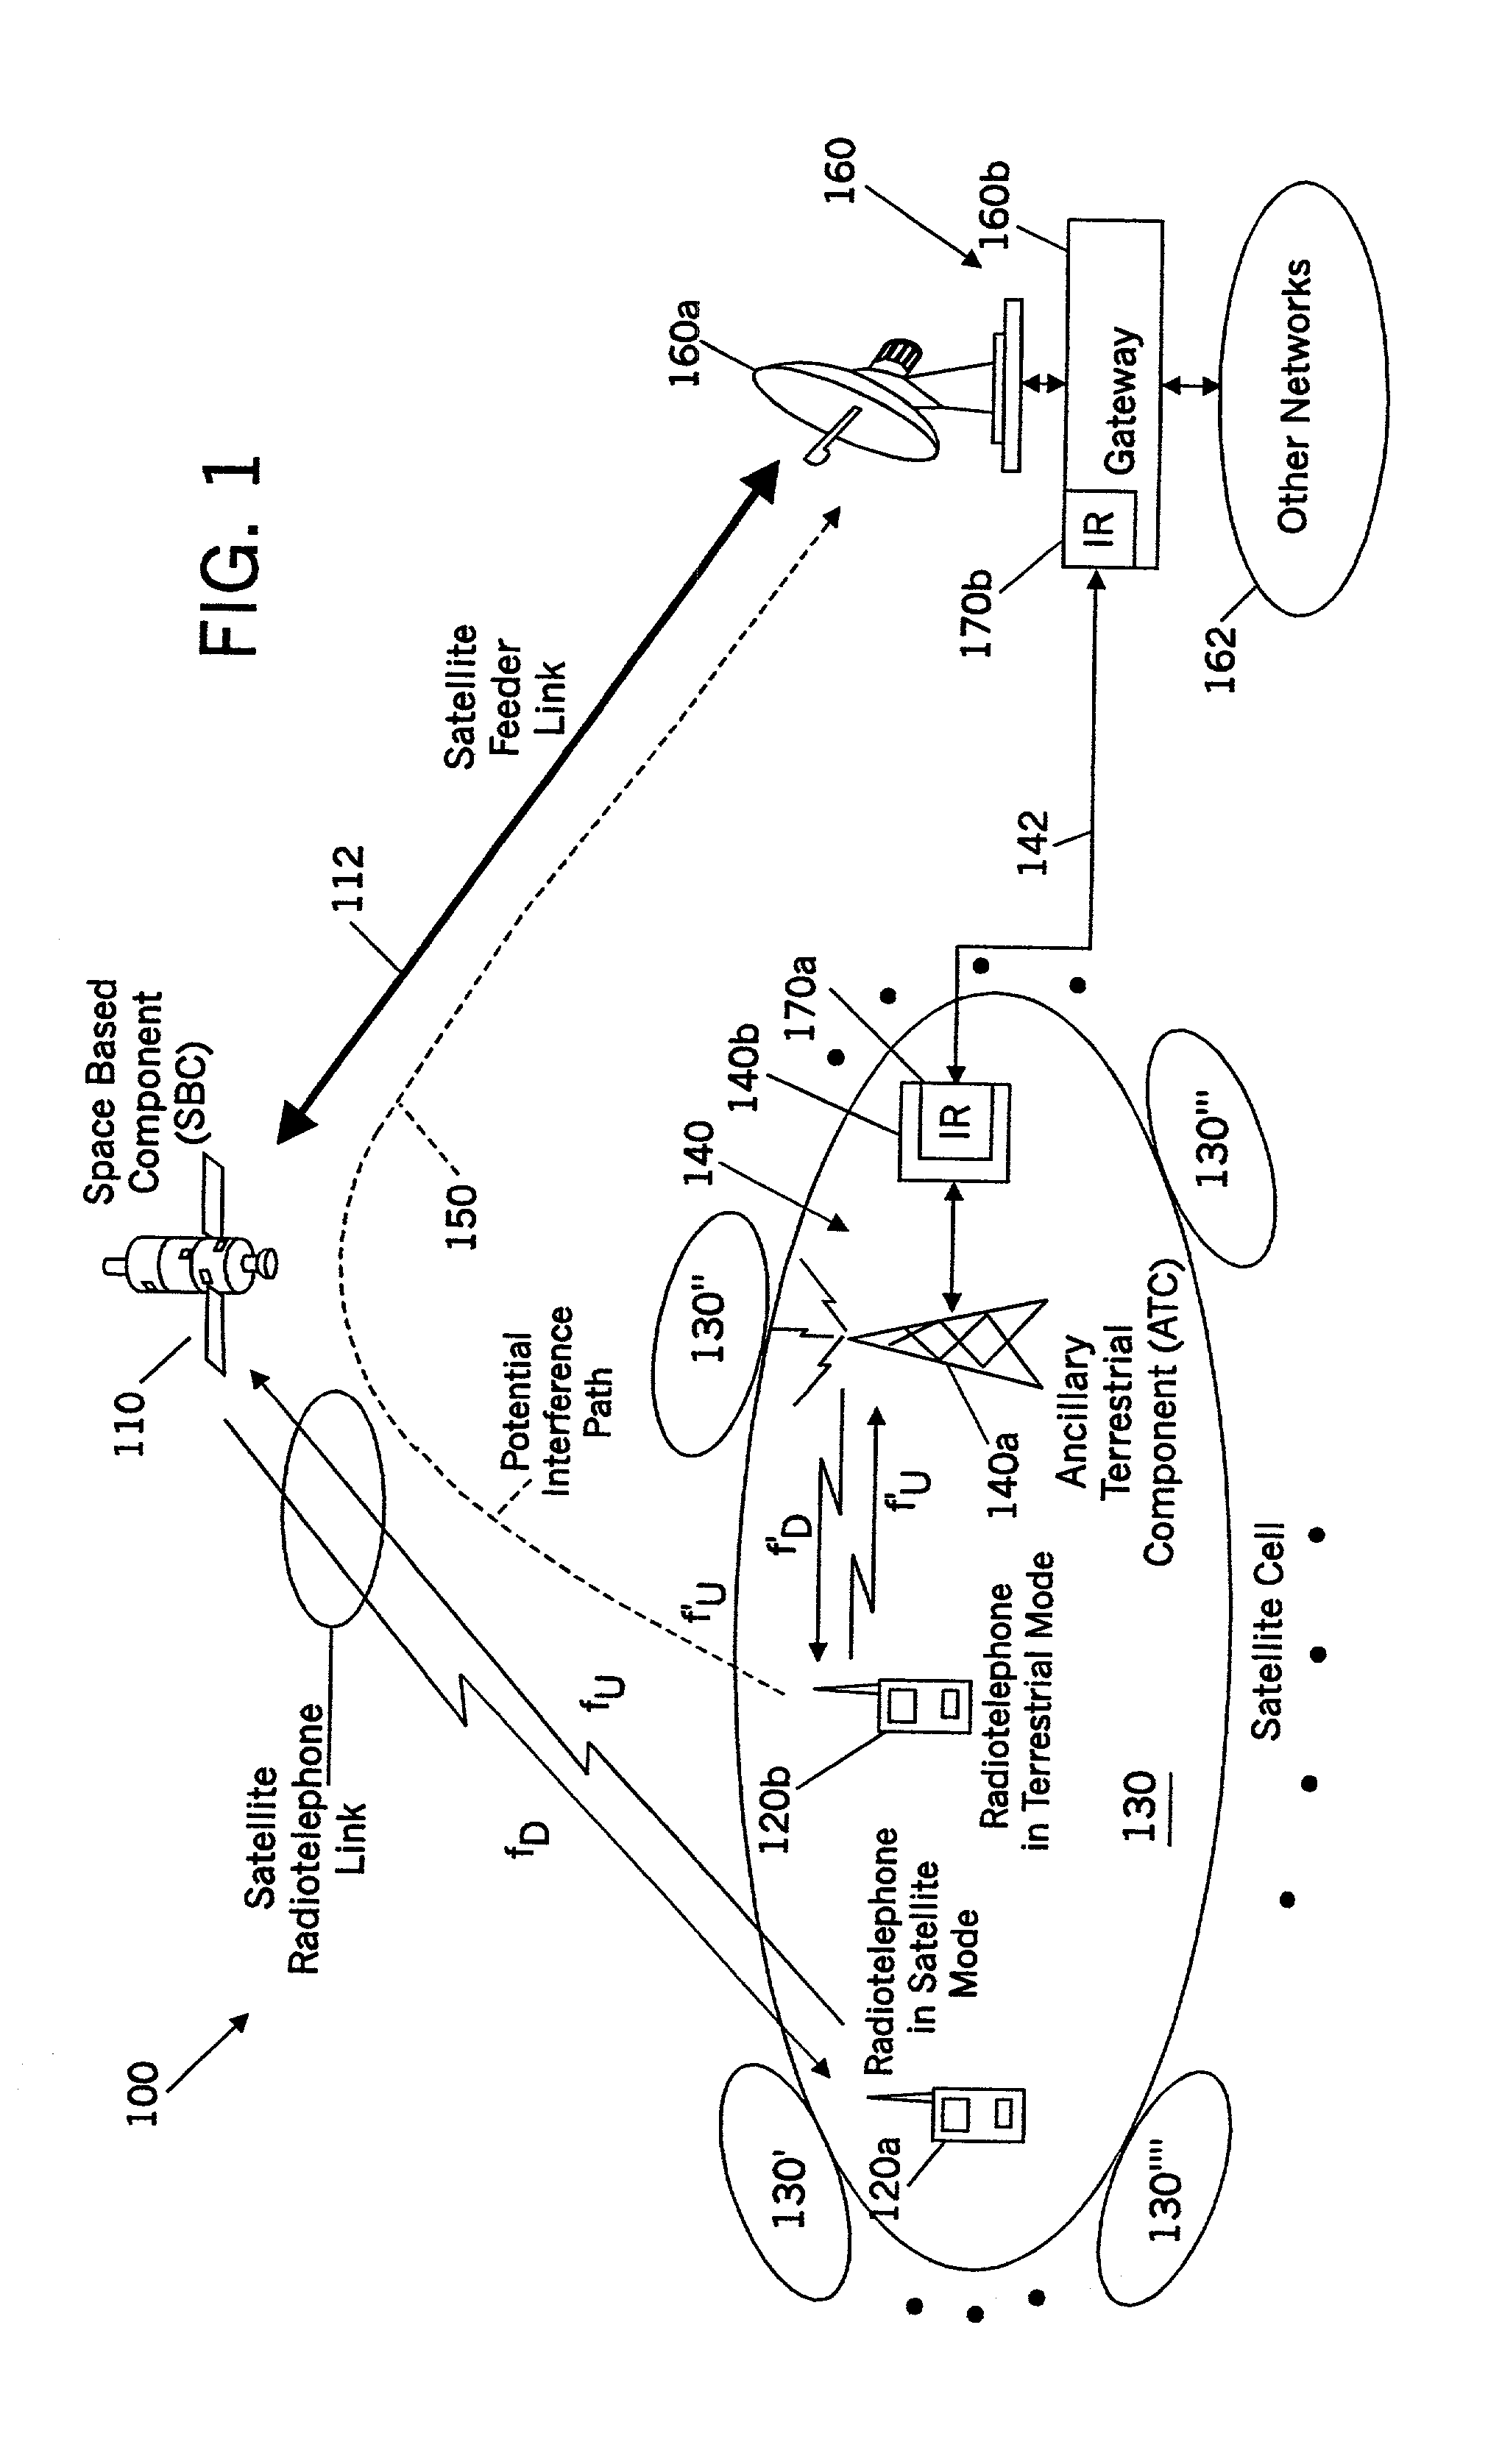 Systems and methods for monitoring terrestrially reused satellite frequencies to reduce potential interference